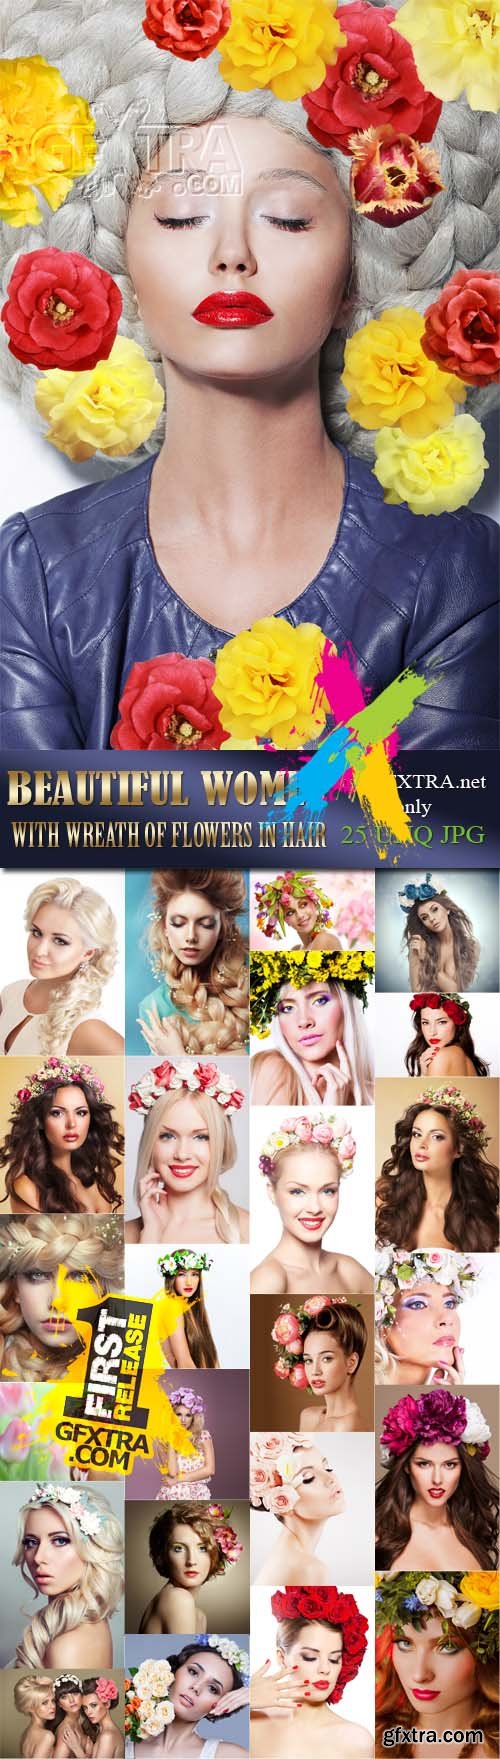 Beautiful women with wreath of flowers in hair, 25xJPGs